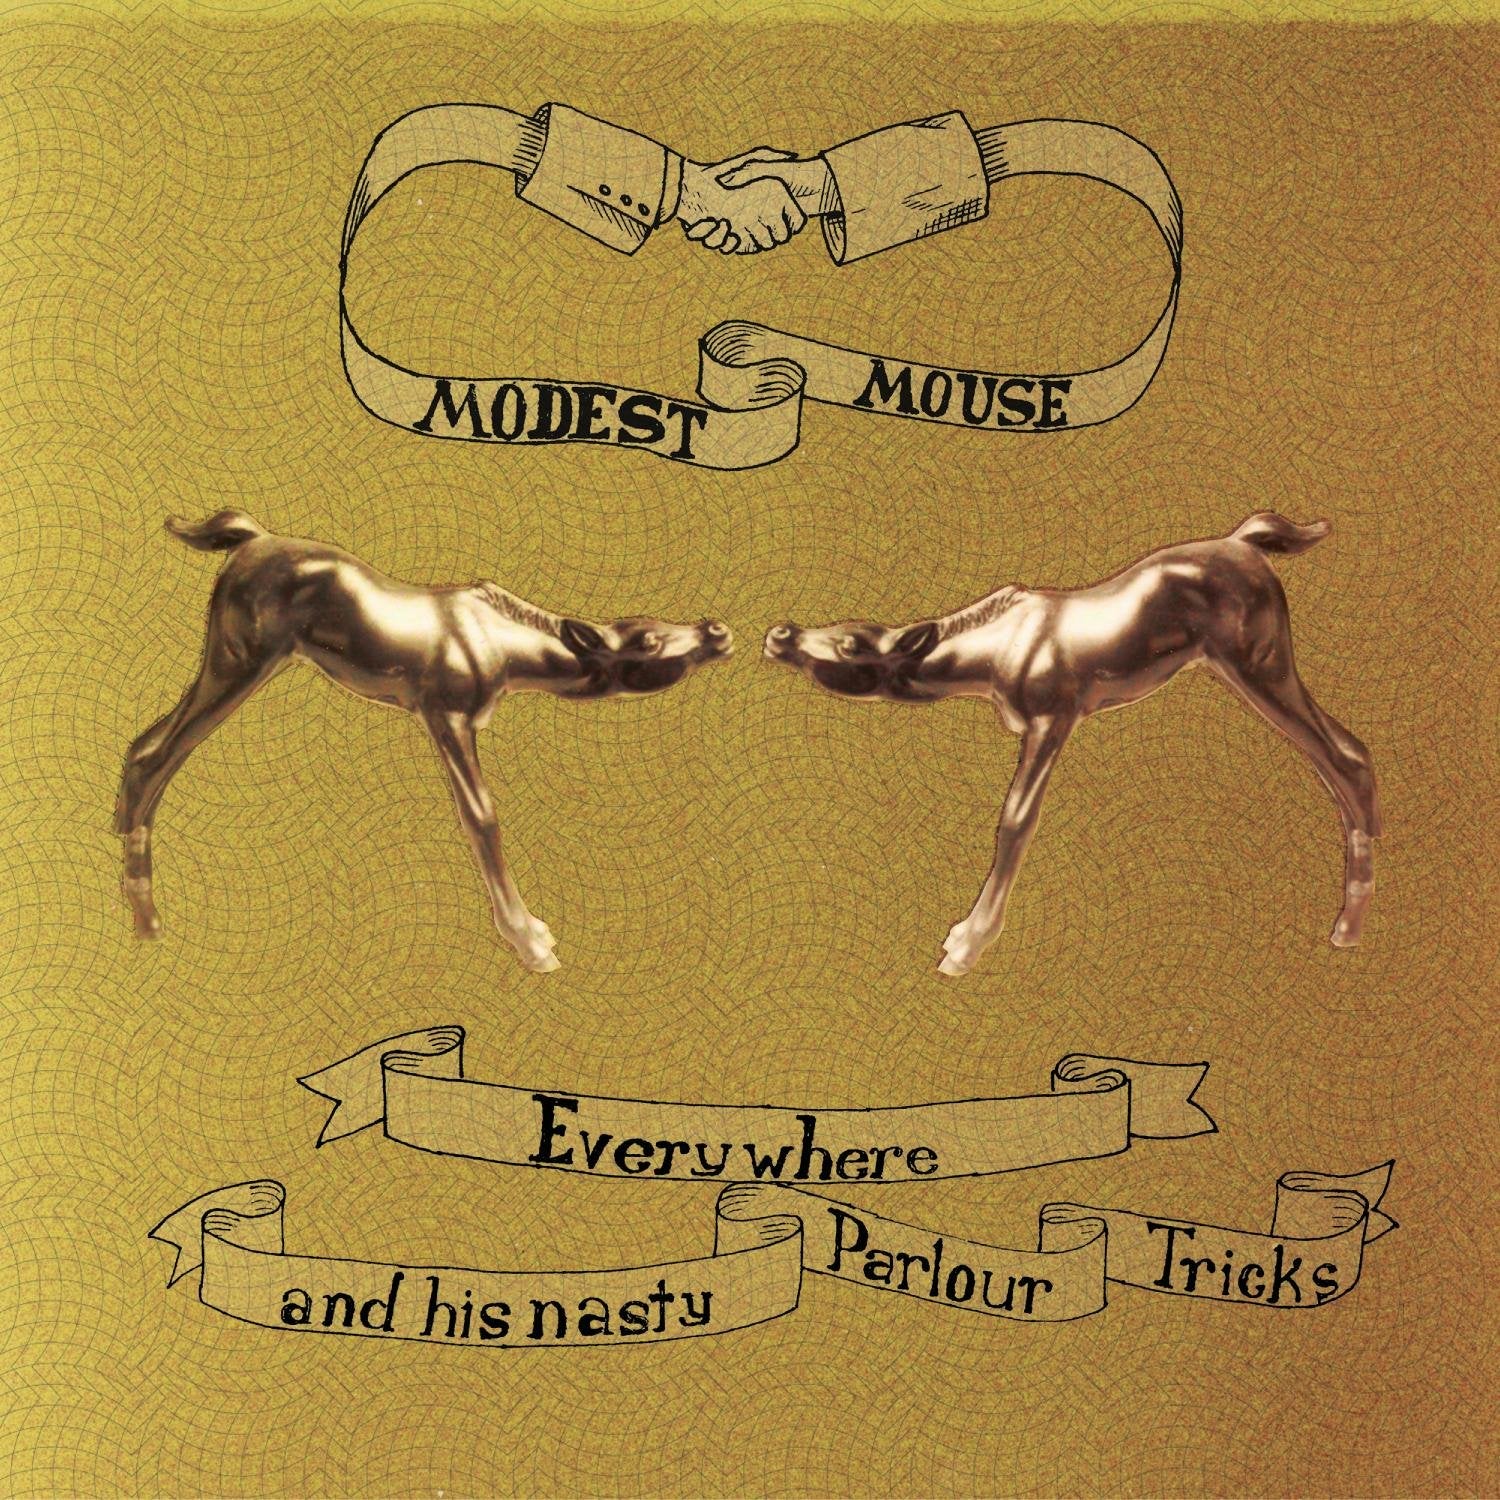 MODEST MOUSE - EVERYWHERE AND HIS NASTY PARLOUR TROCKS Vinyl LP